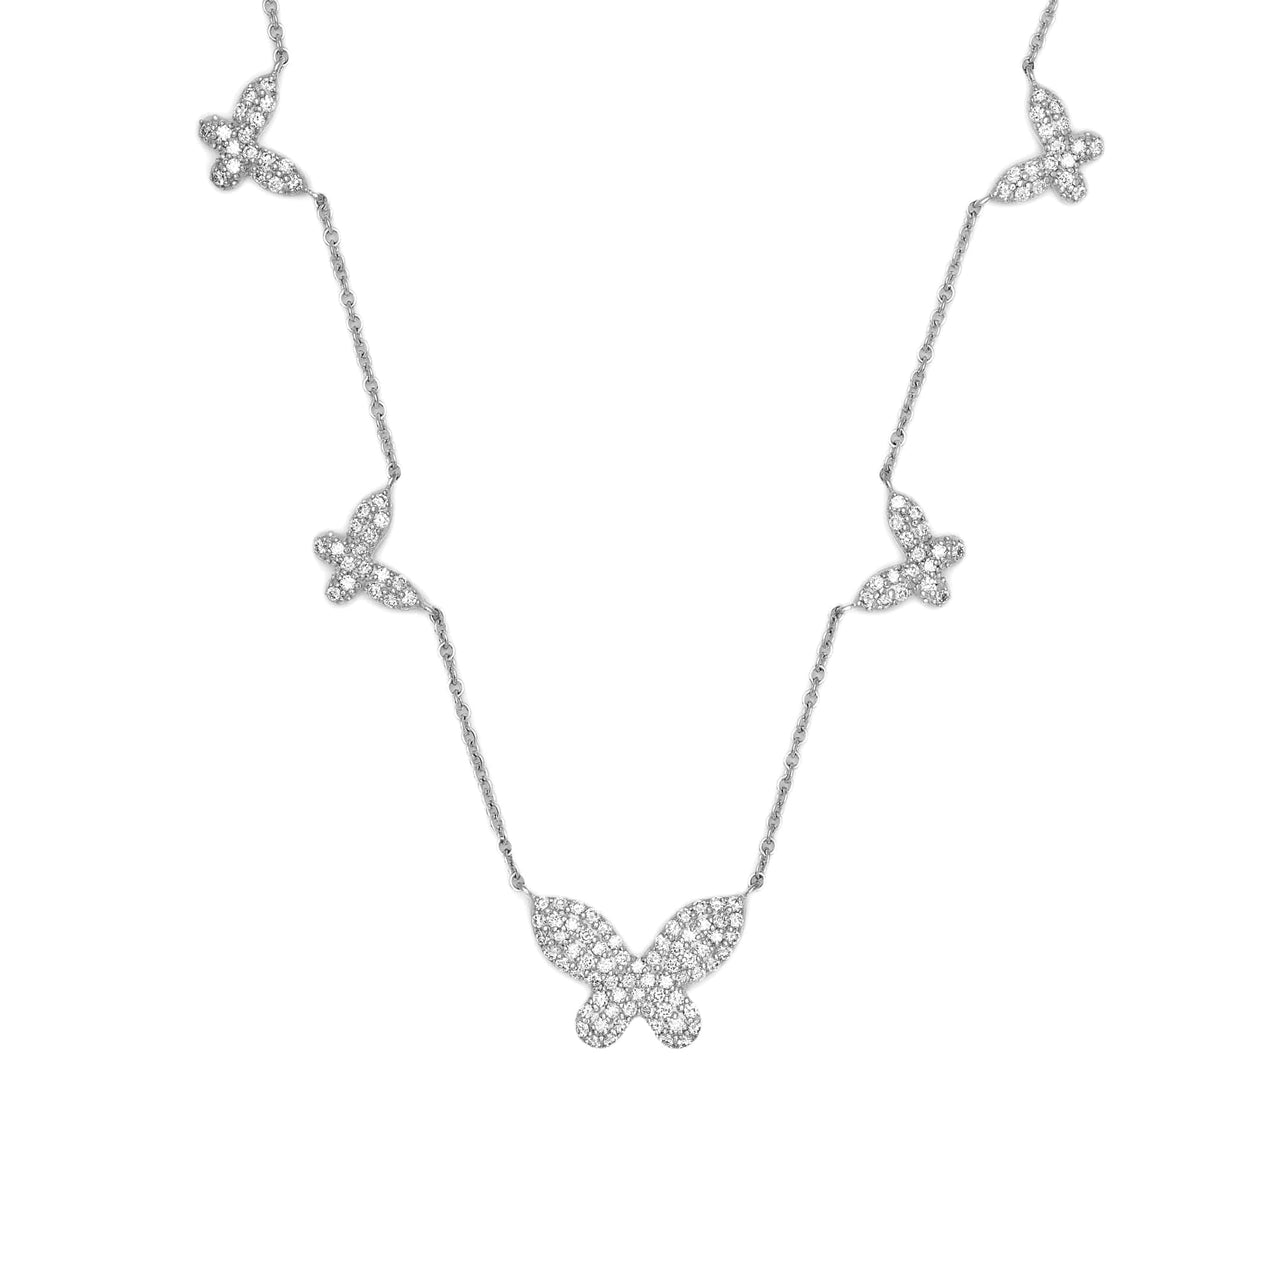 Diamond and White Gold Butterfly Necklace